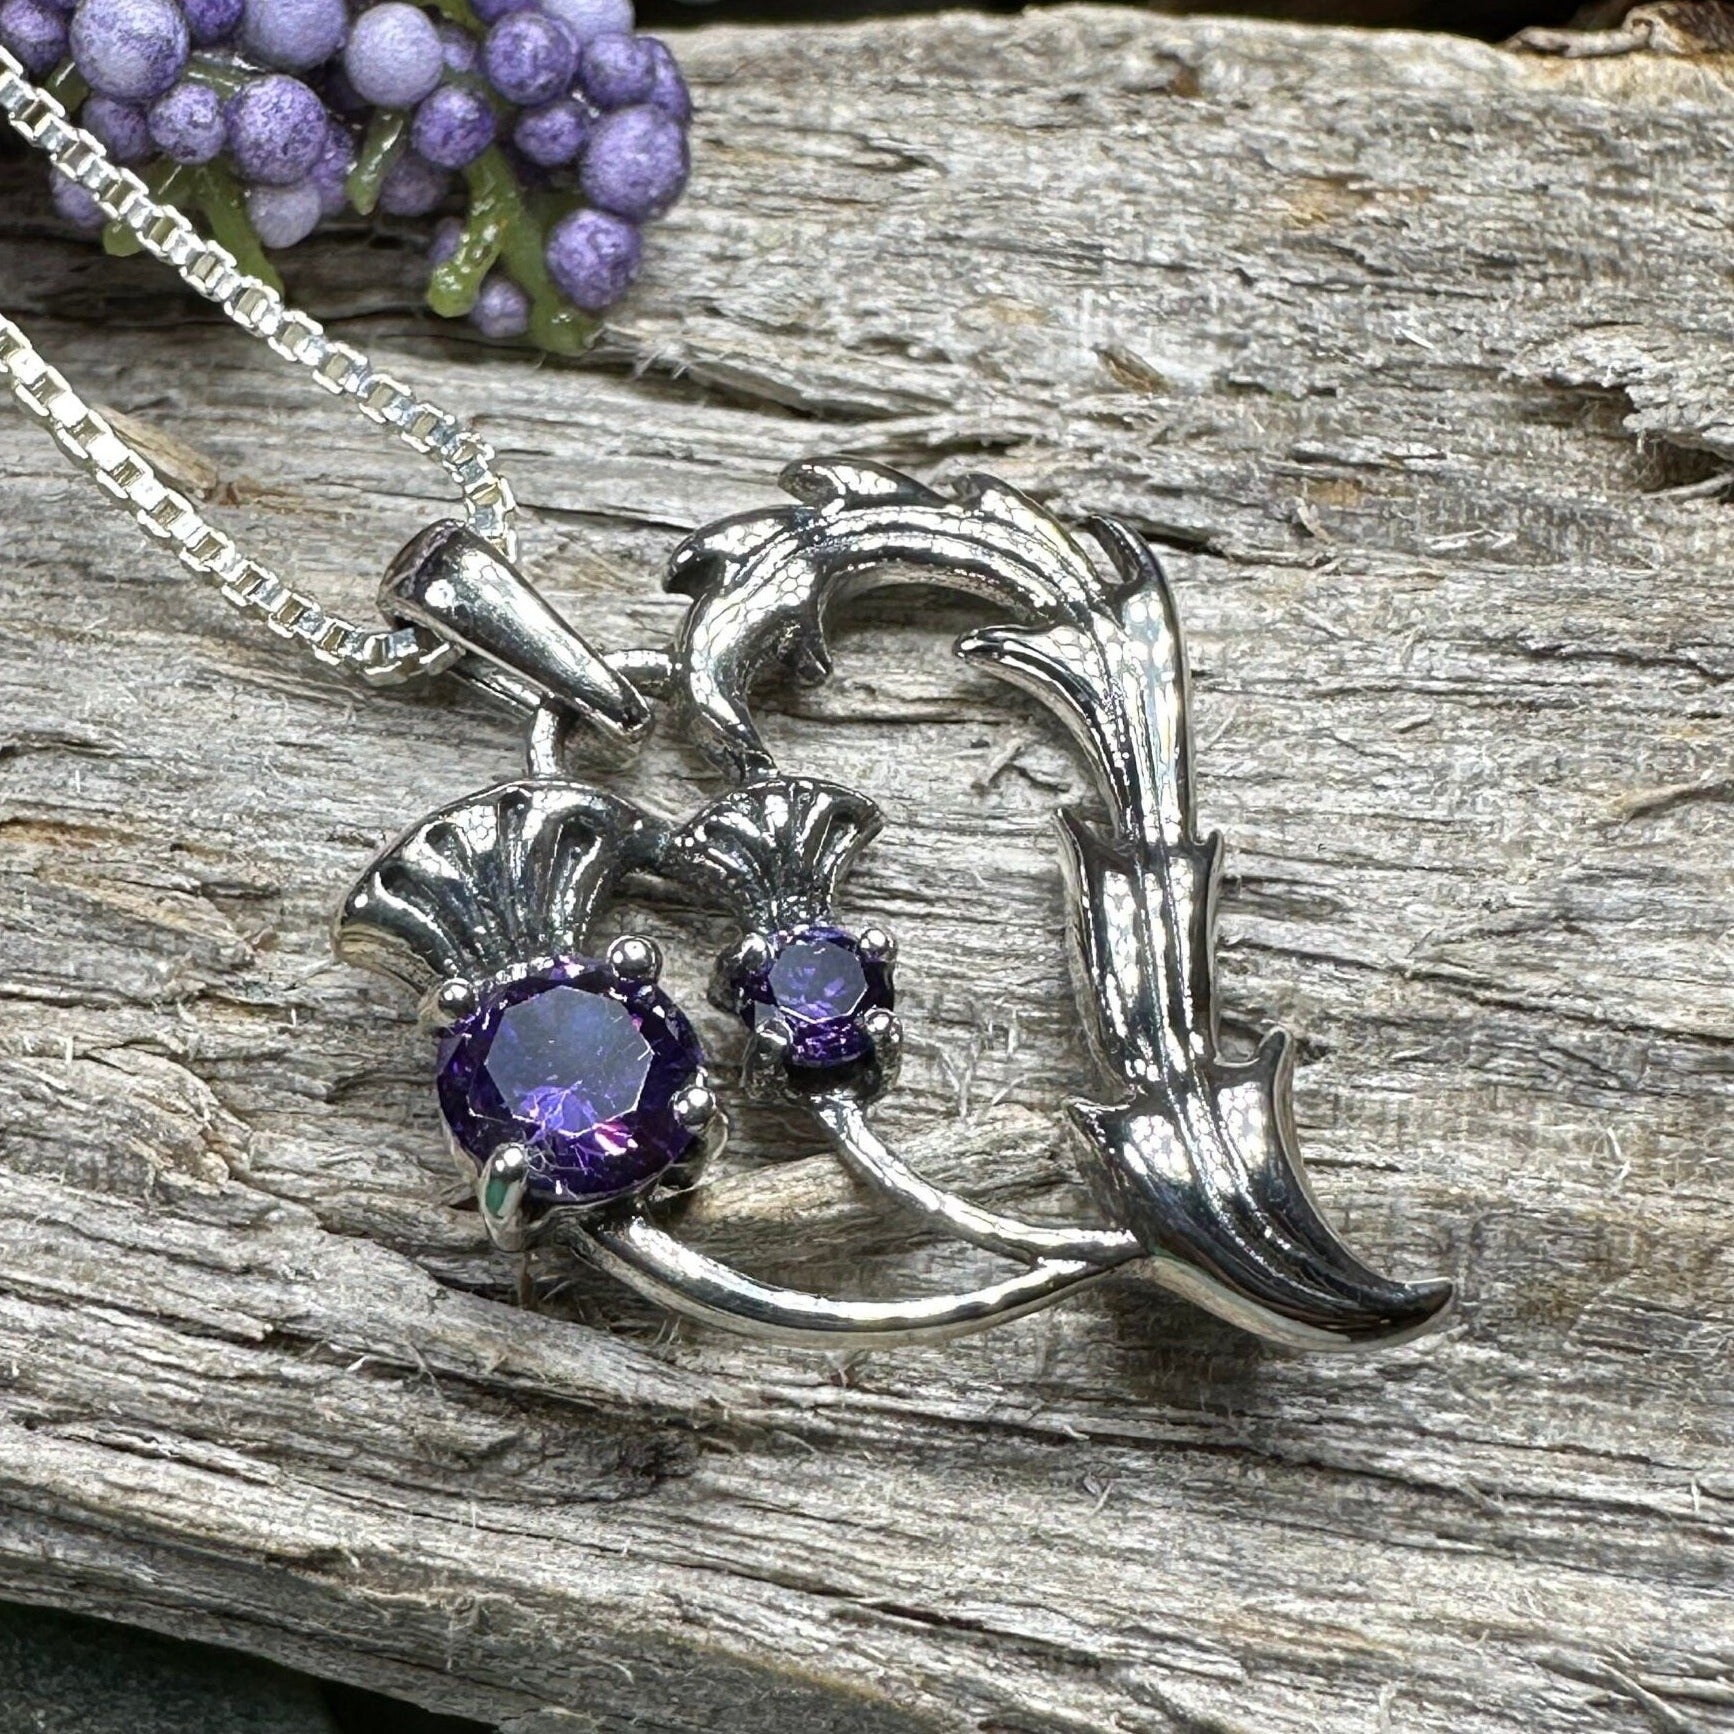 Amethyst Thistle Necklace, Thistle Jewelry, Scotland Jewelry, Celtic Necklace, Flower Necklace, Bridal Jewelry, Amethyst Pendant, Outlander